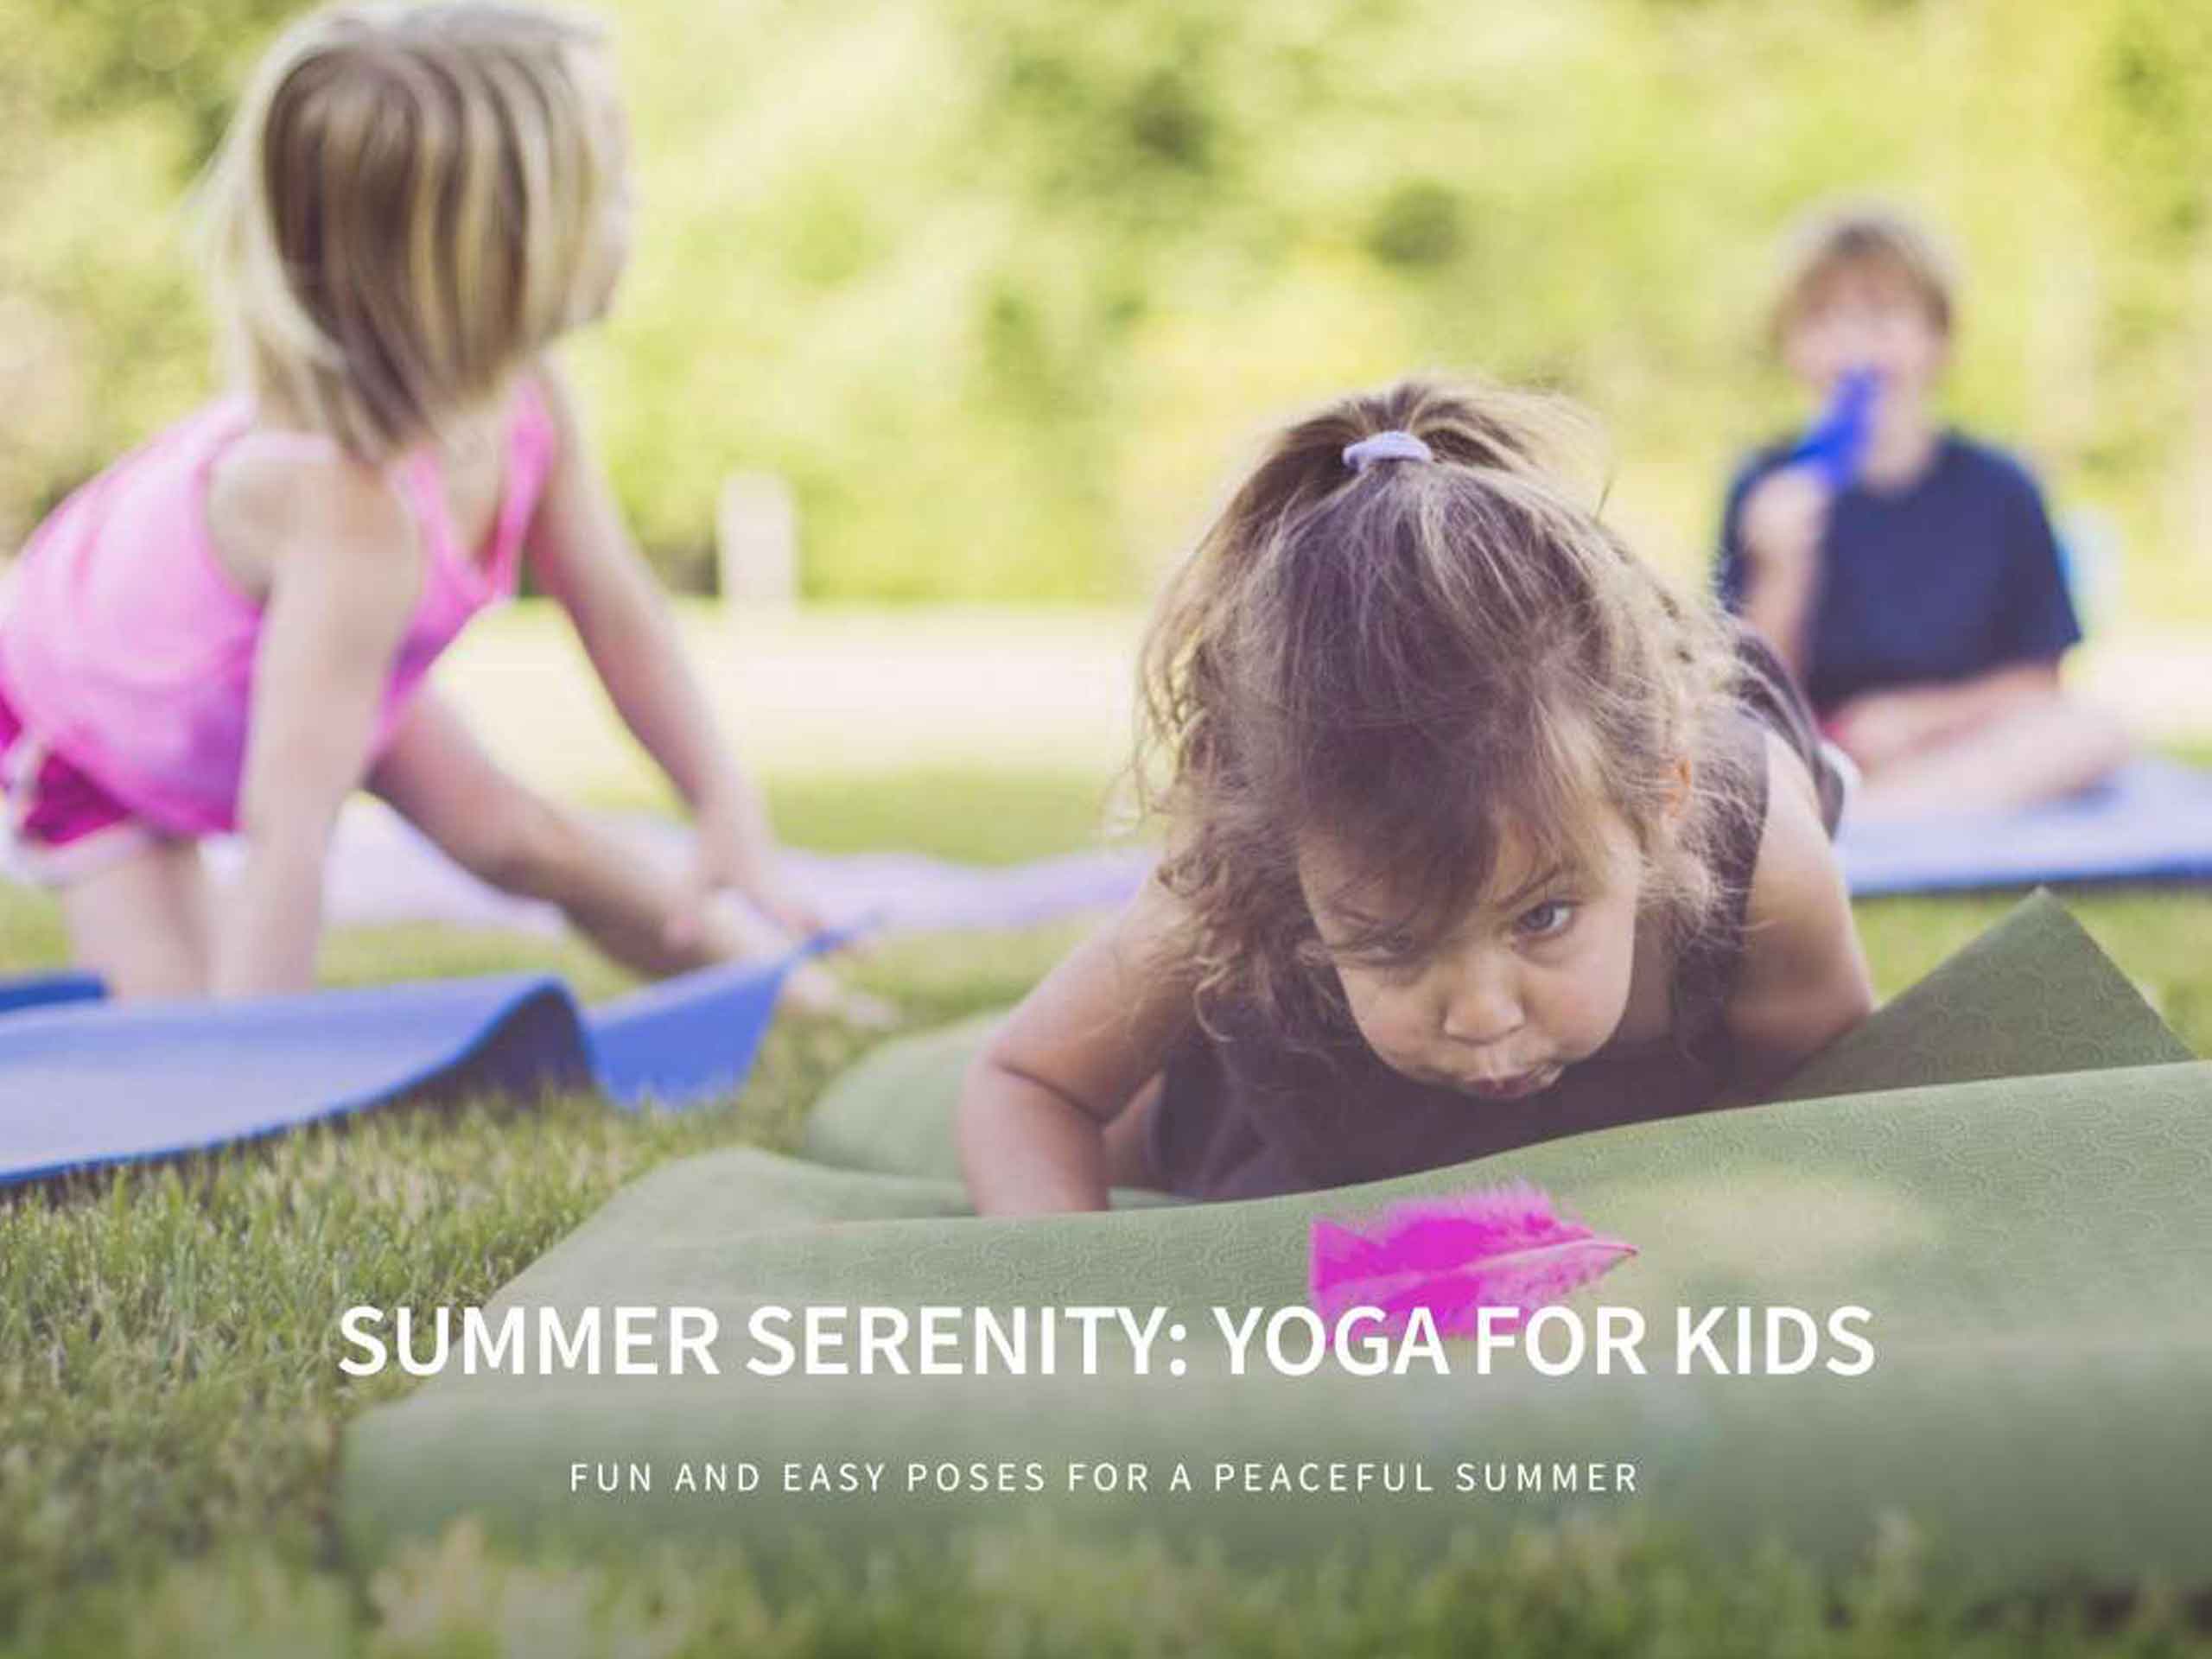 Summer Serenity: Fun and Easy Yoga Poses for Kids